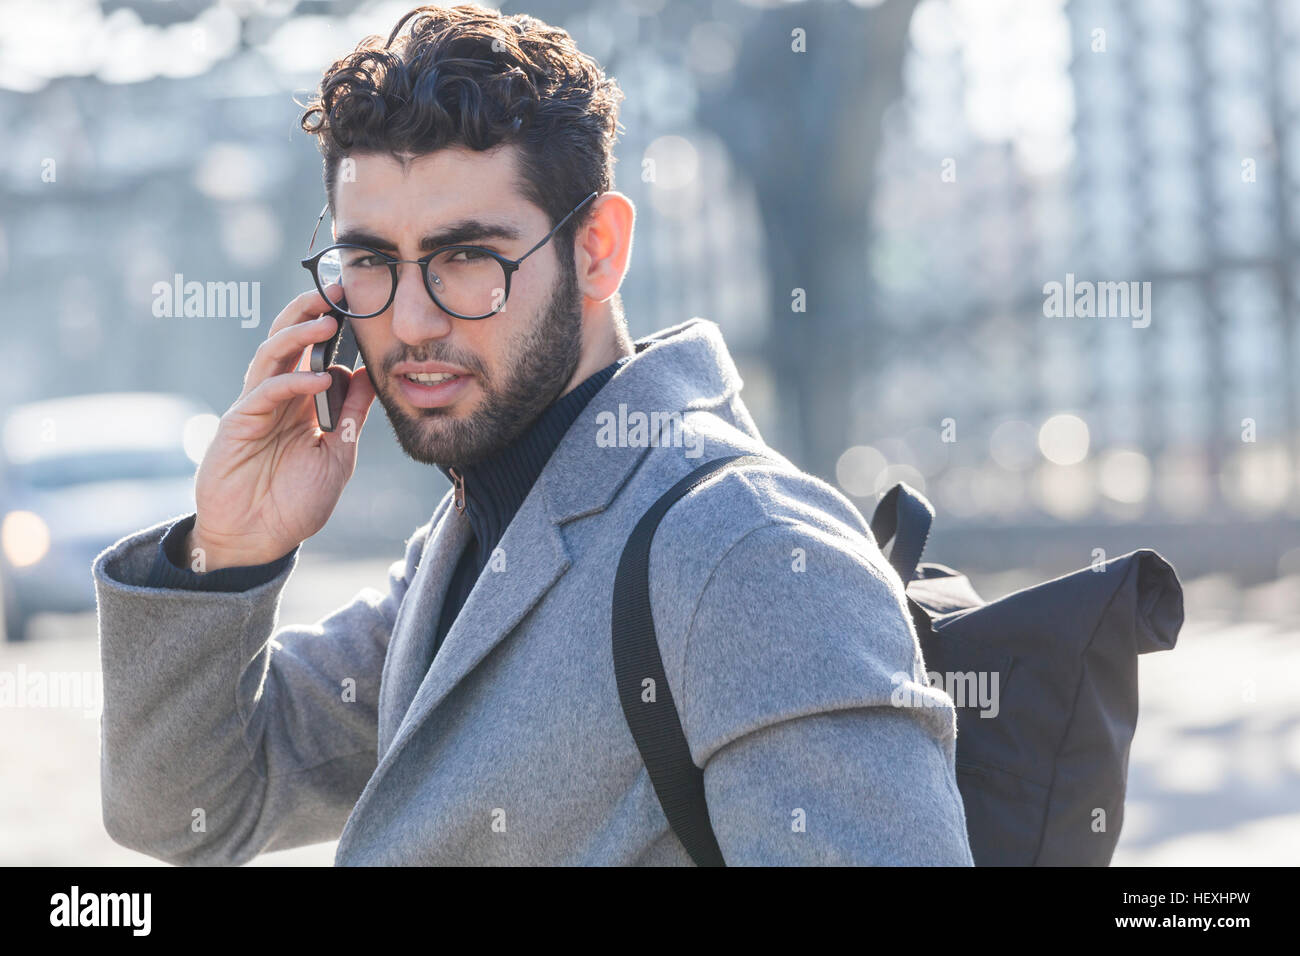 Portrait of young businessman with backpack on the phone Stock Photo